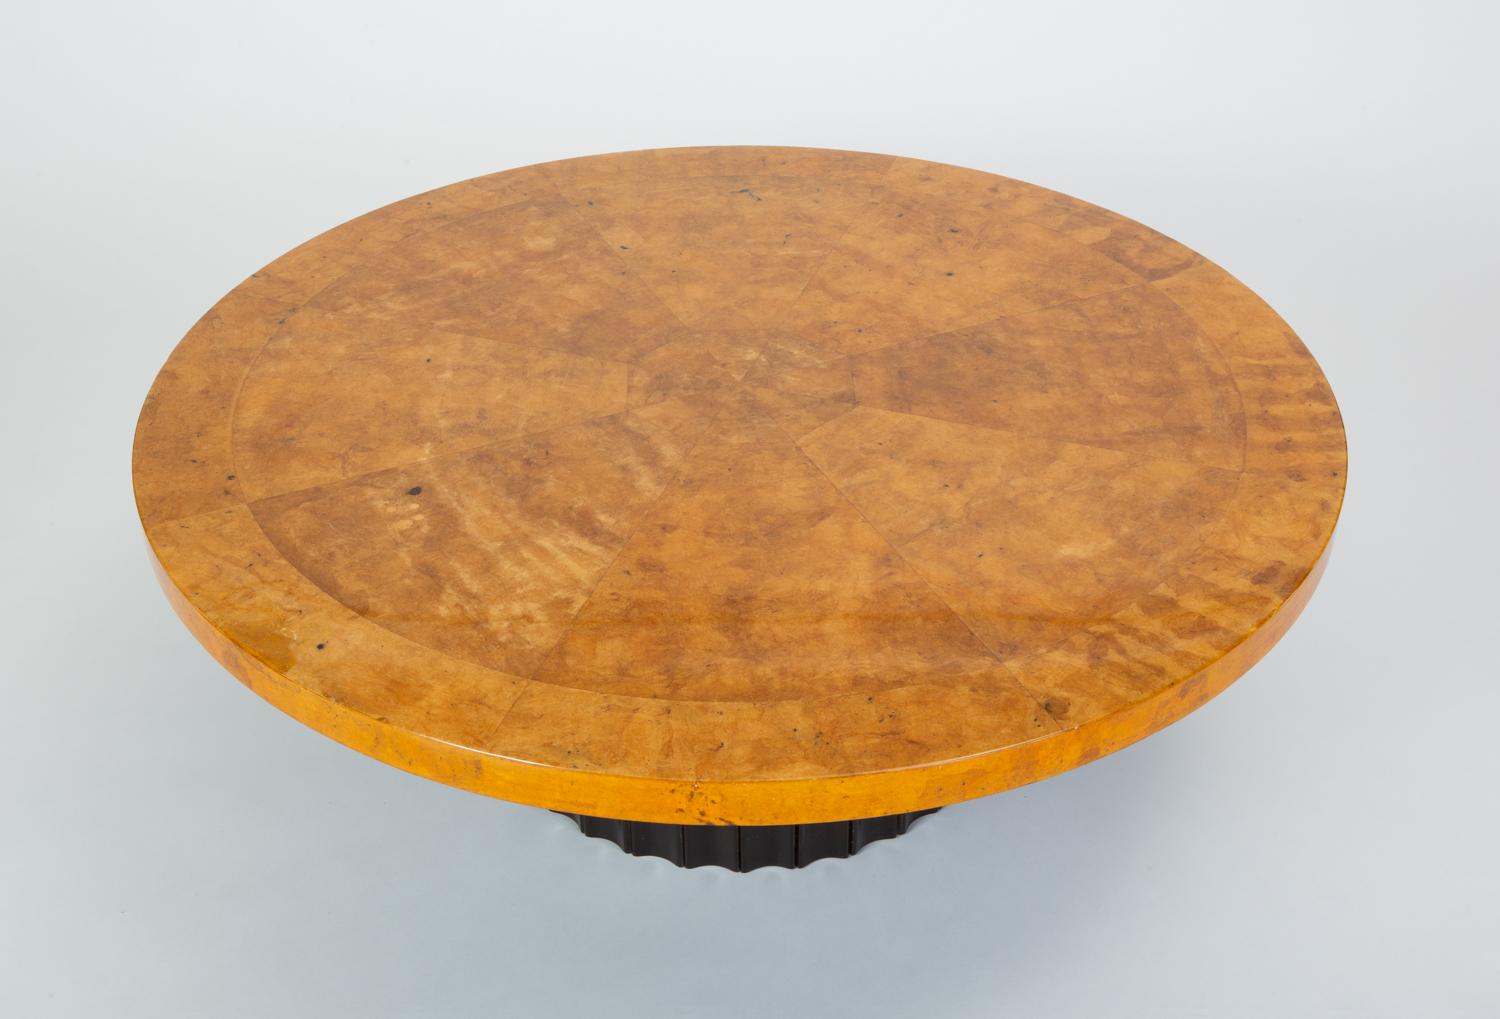 A 1970s round coffee table with a plinth base and distinguished lacquered surface. The custom-built piece has a circular wooden frame wrapped in parchment and finished with a high-gloss lacquer coat. Individual pieces of the parchment have been